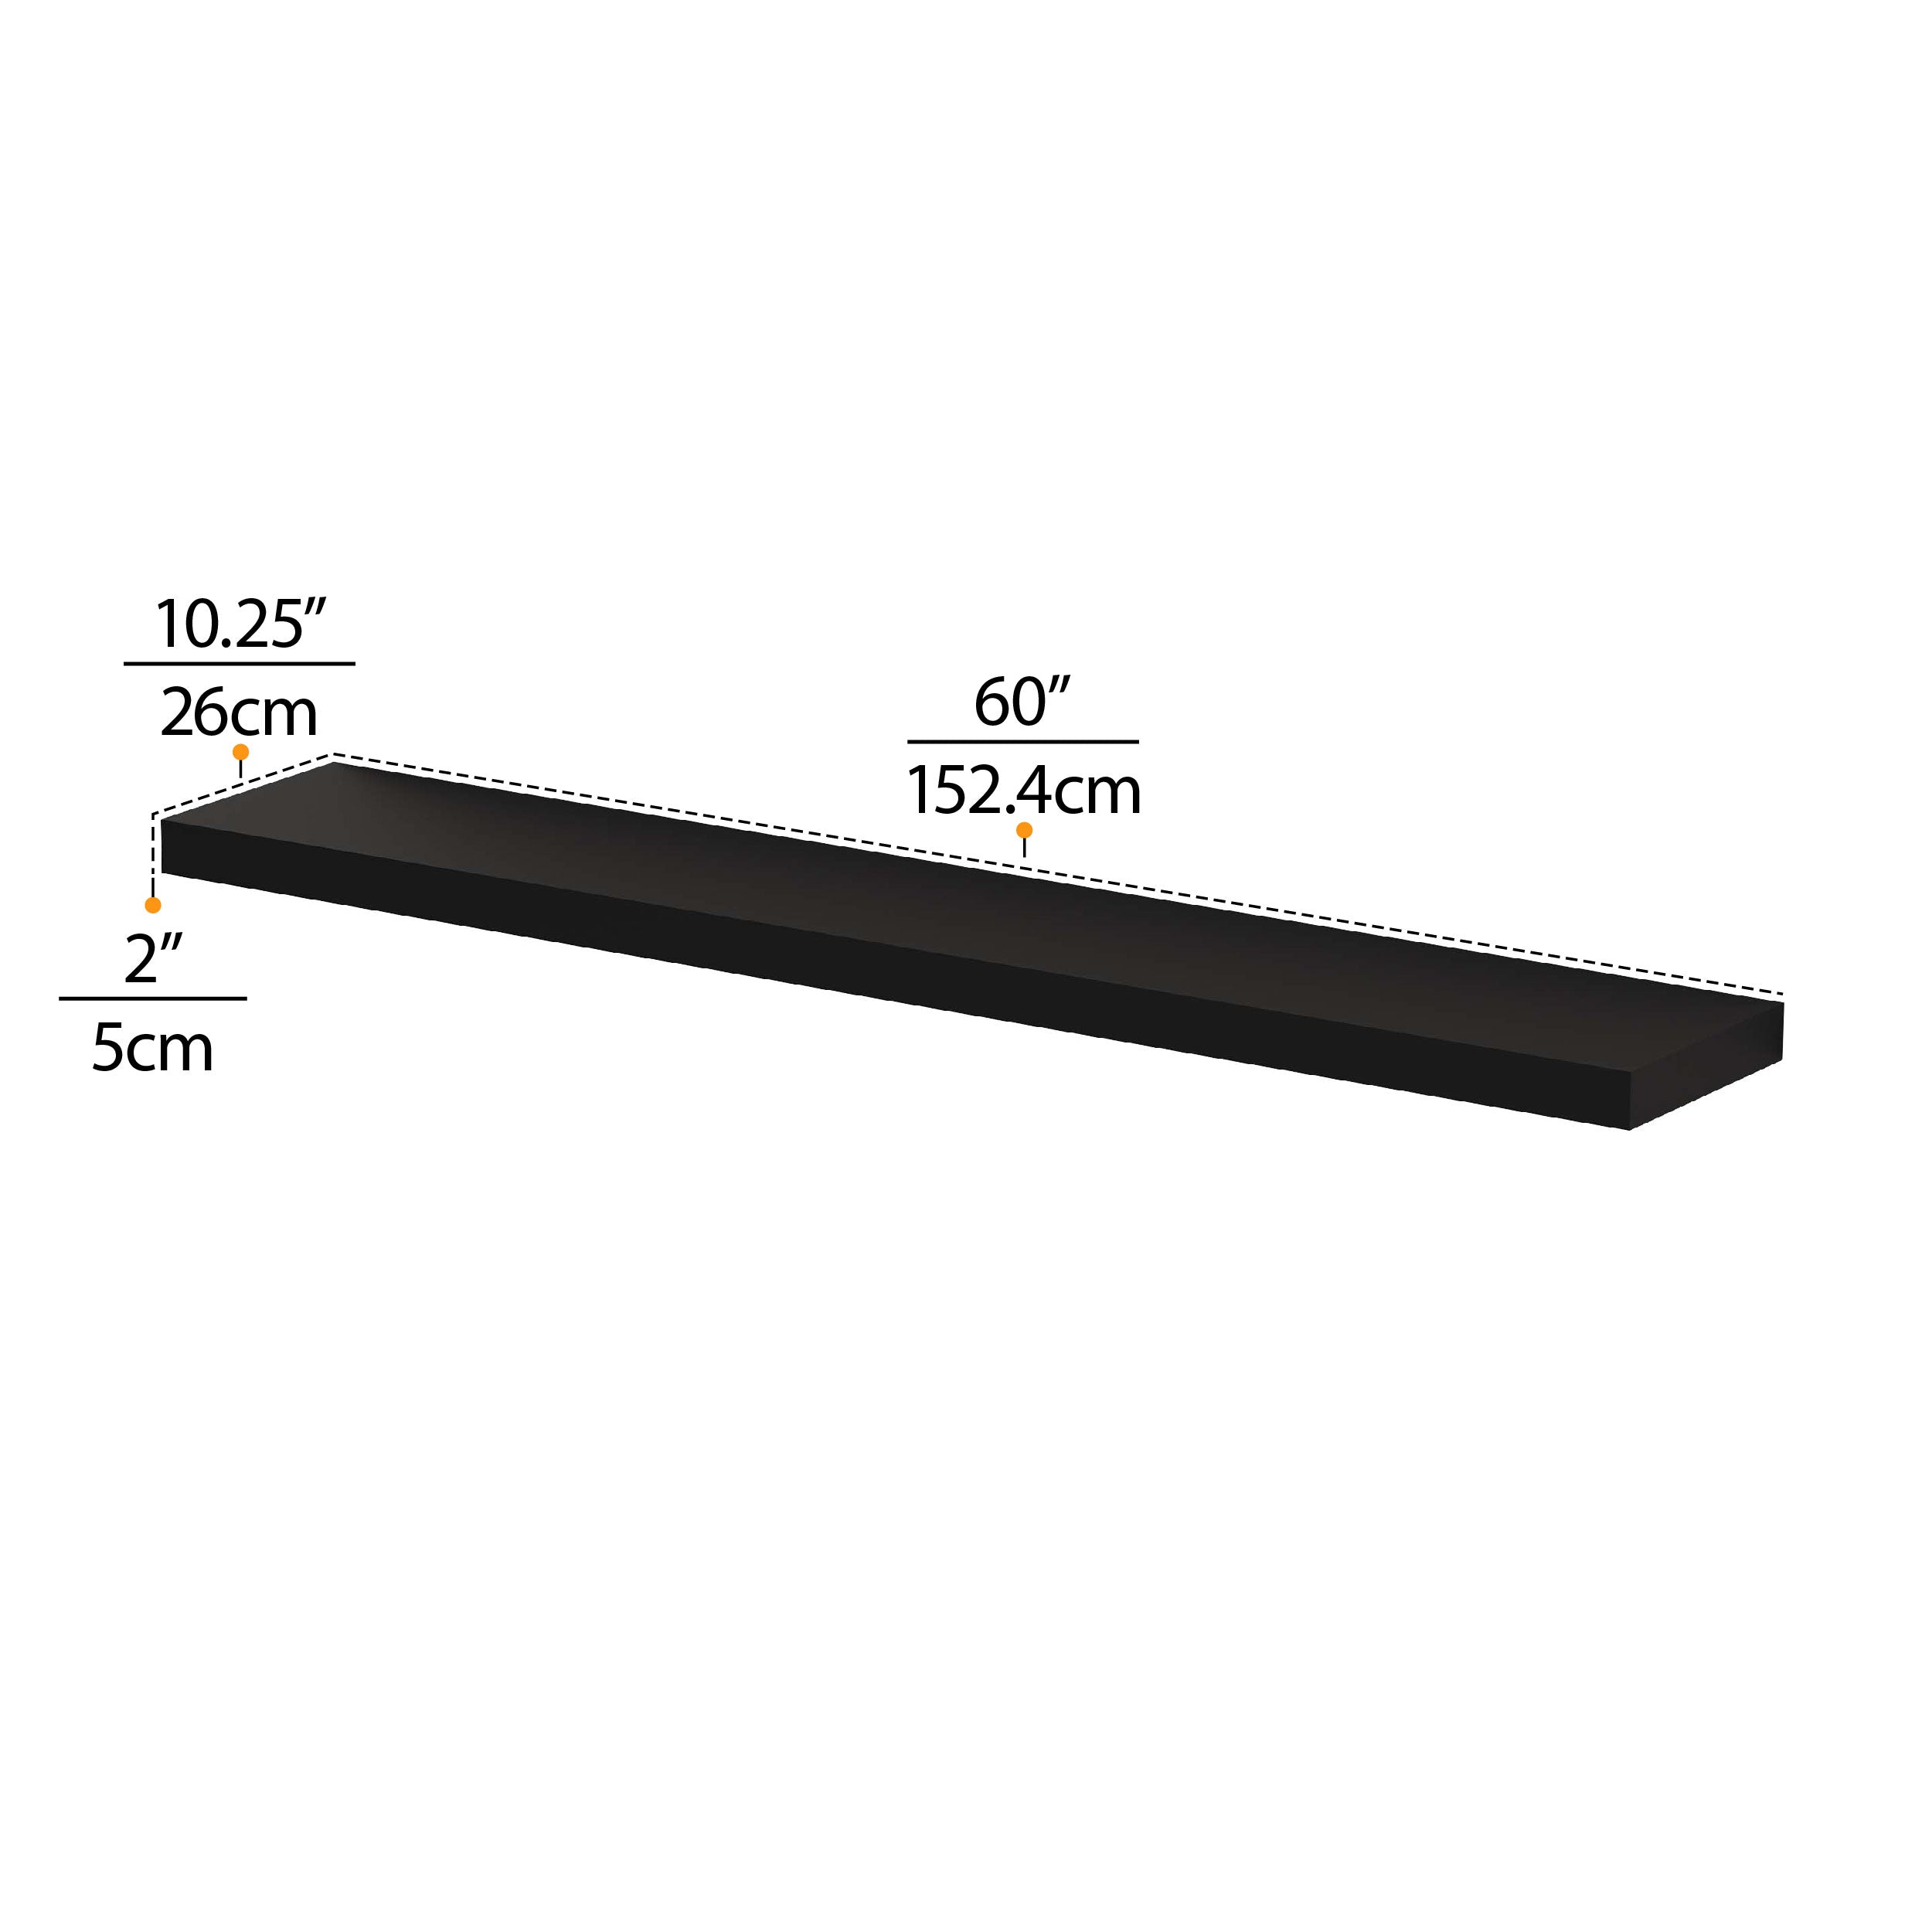 A product diagram displaying a 60" long and 10.25" deep black black wall shelf, with precise dimensions marked for clarity, ideal for home installation.